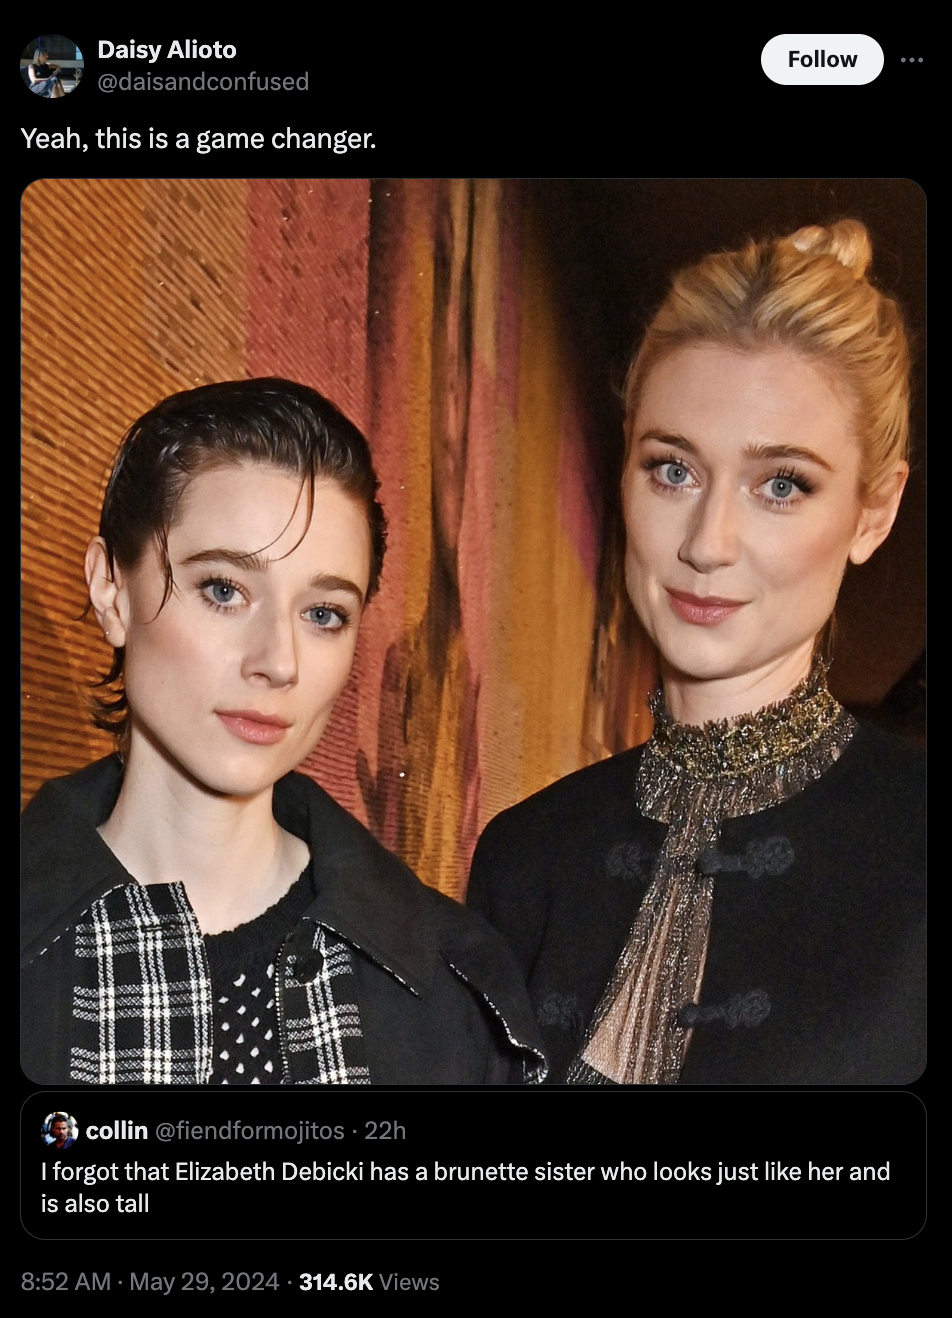 elizabeth debicki paris fashion week - Daisy Alioto Yeah, this is a game changer. collin I forgot that Elizabeth Debicki has a brunette sister who looks just her and is also tall Views